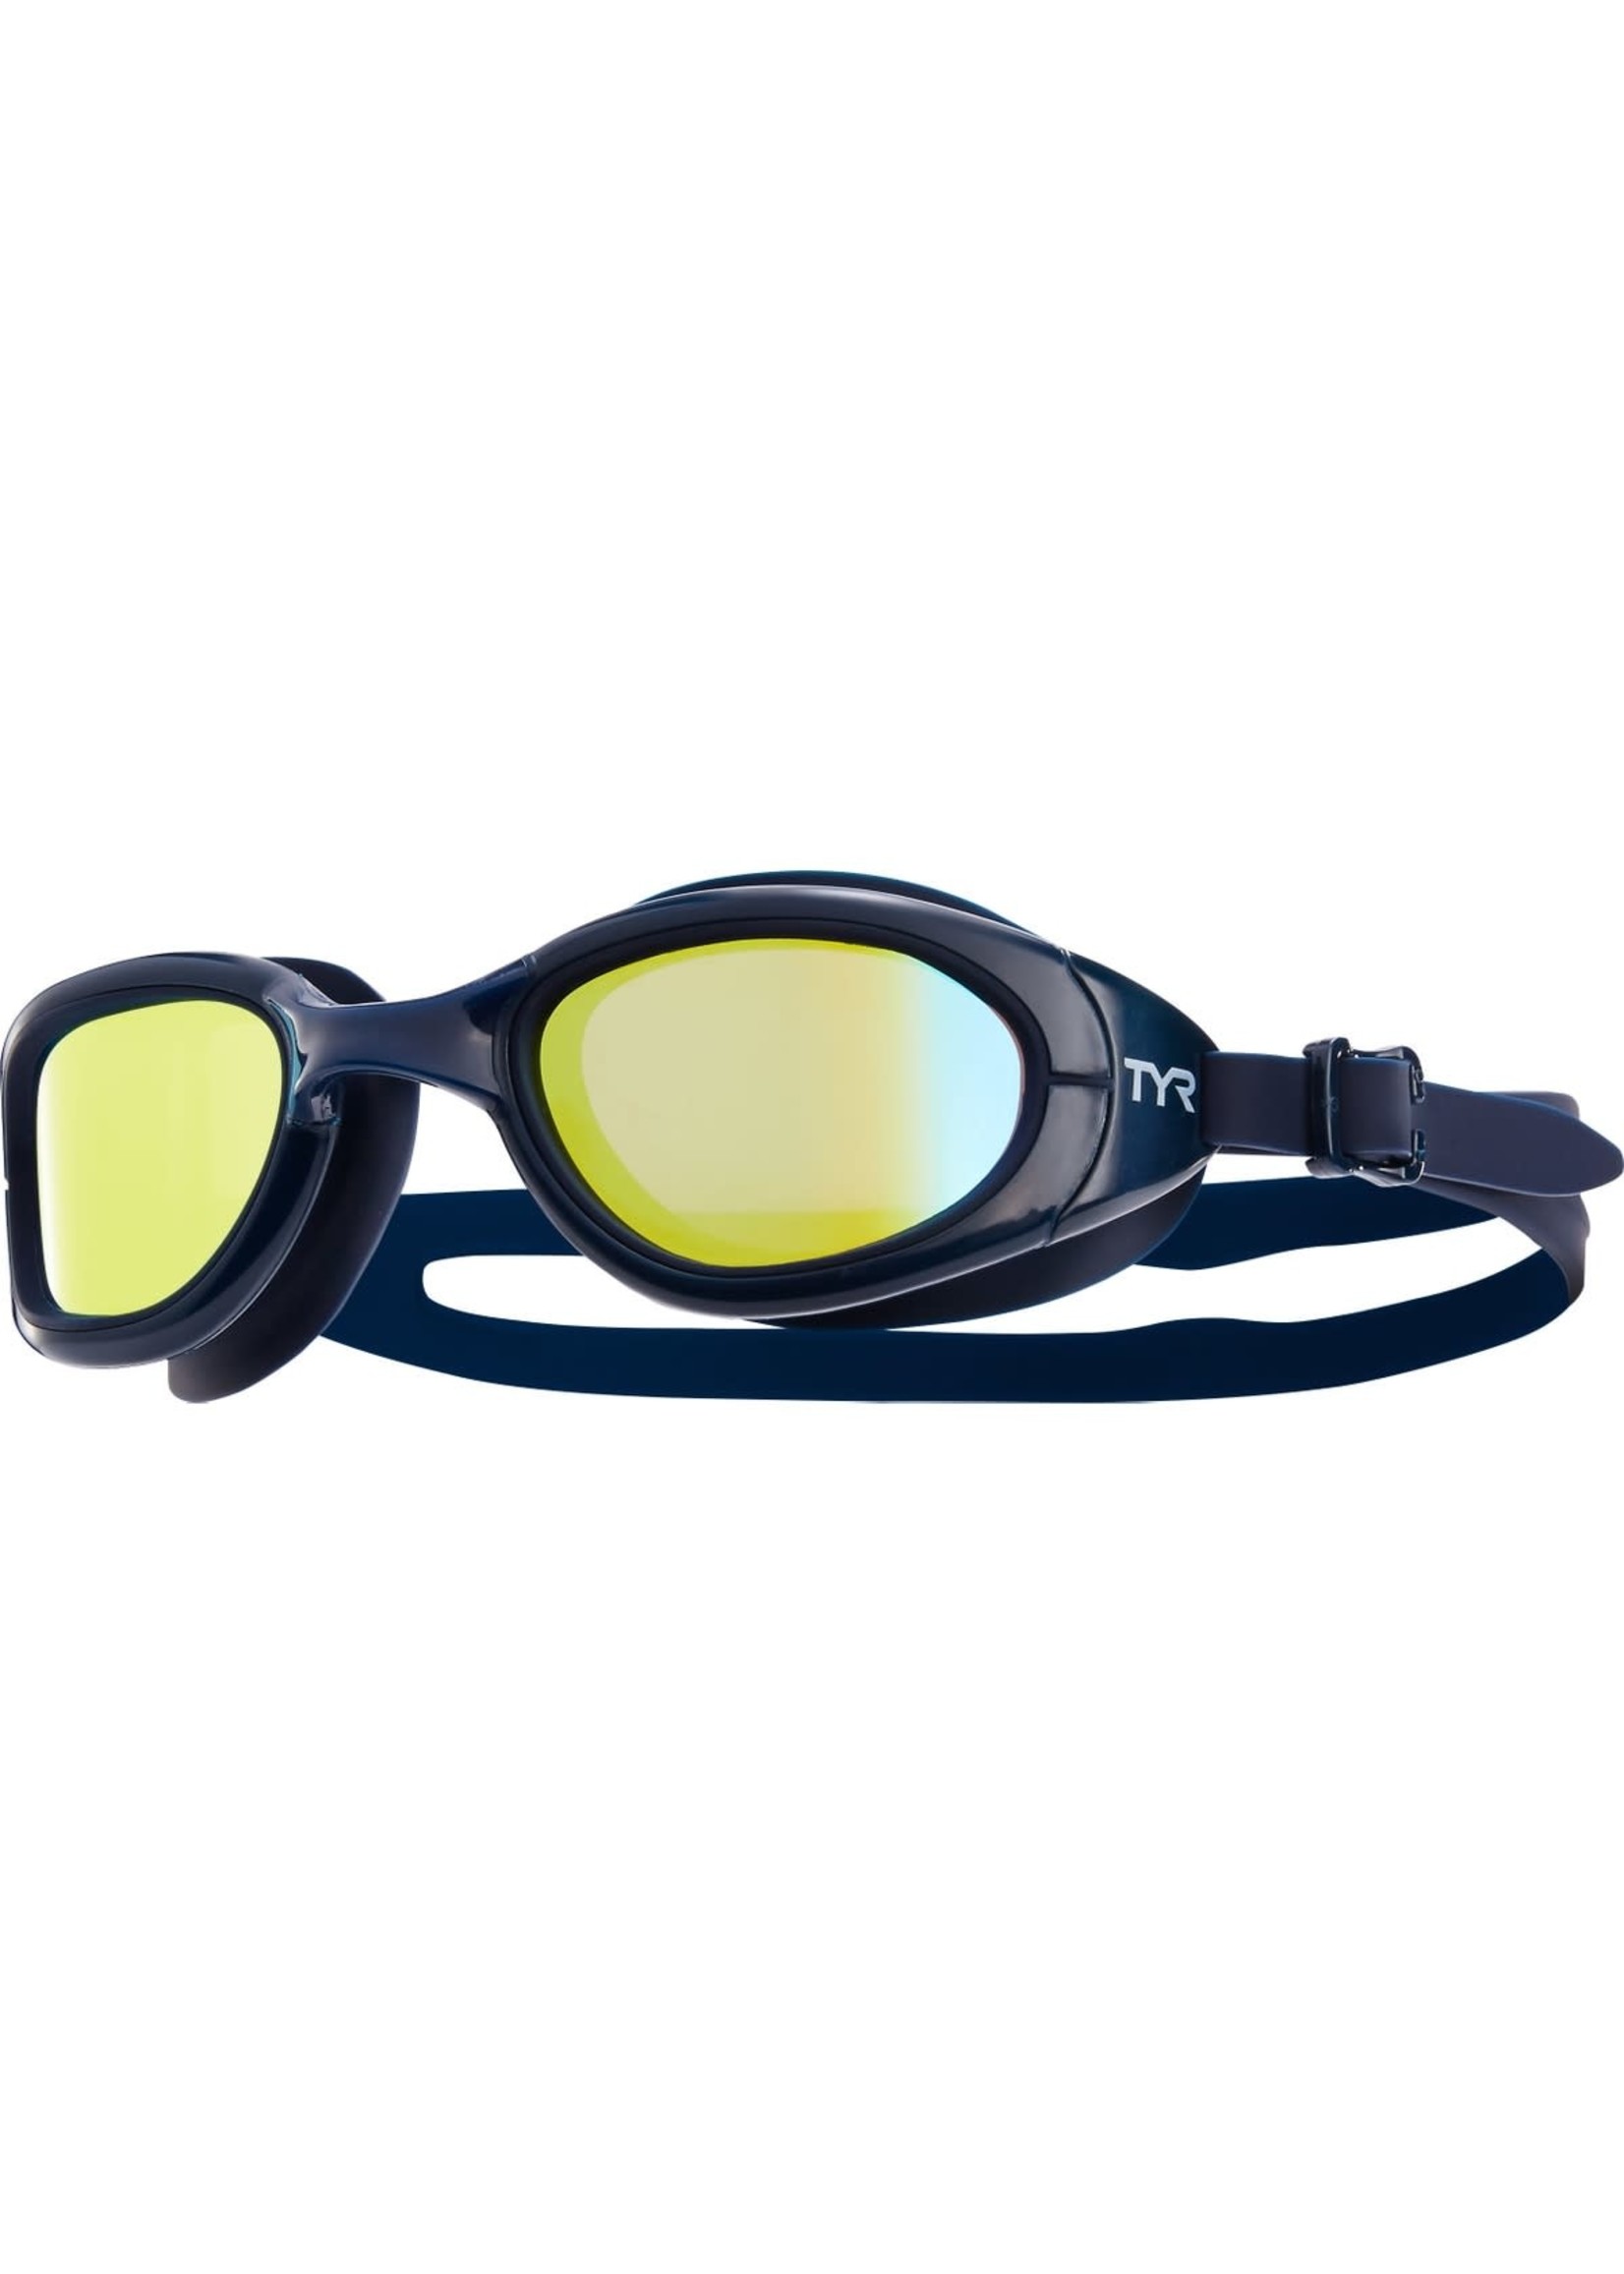 TYR SPECIAL OPS 2.0 POLARIZED BLACK